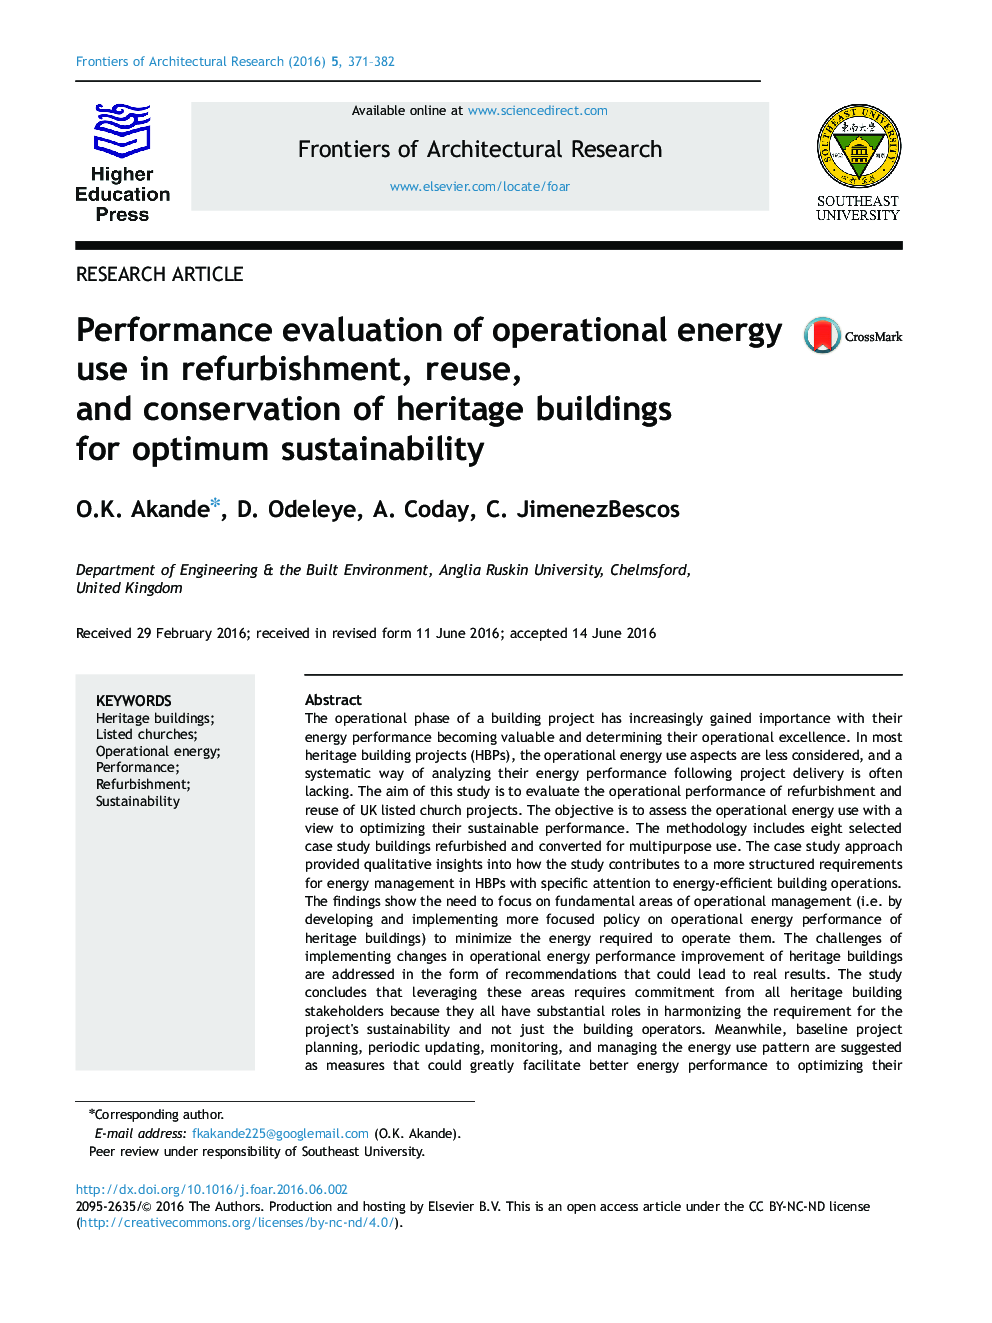 Performance evaluation of operational energy use in refurbishment, reuse, and conservation of heritage buildings for optimum sustainability